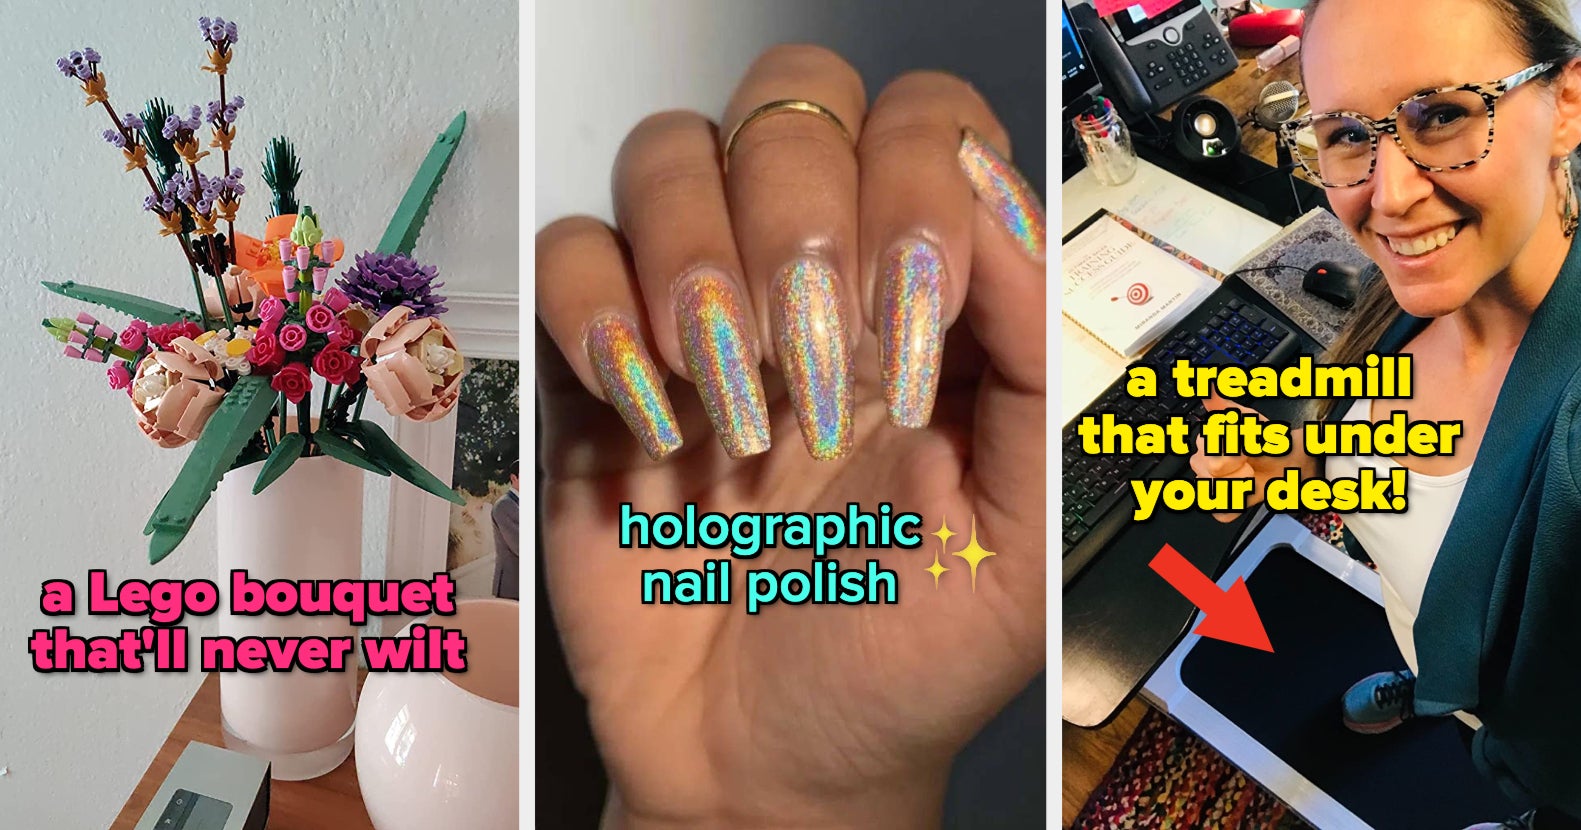 19 Cool TikTok Products You Are Missing Out On